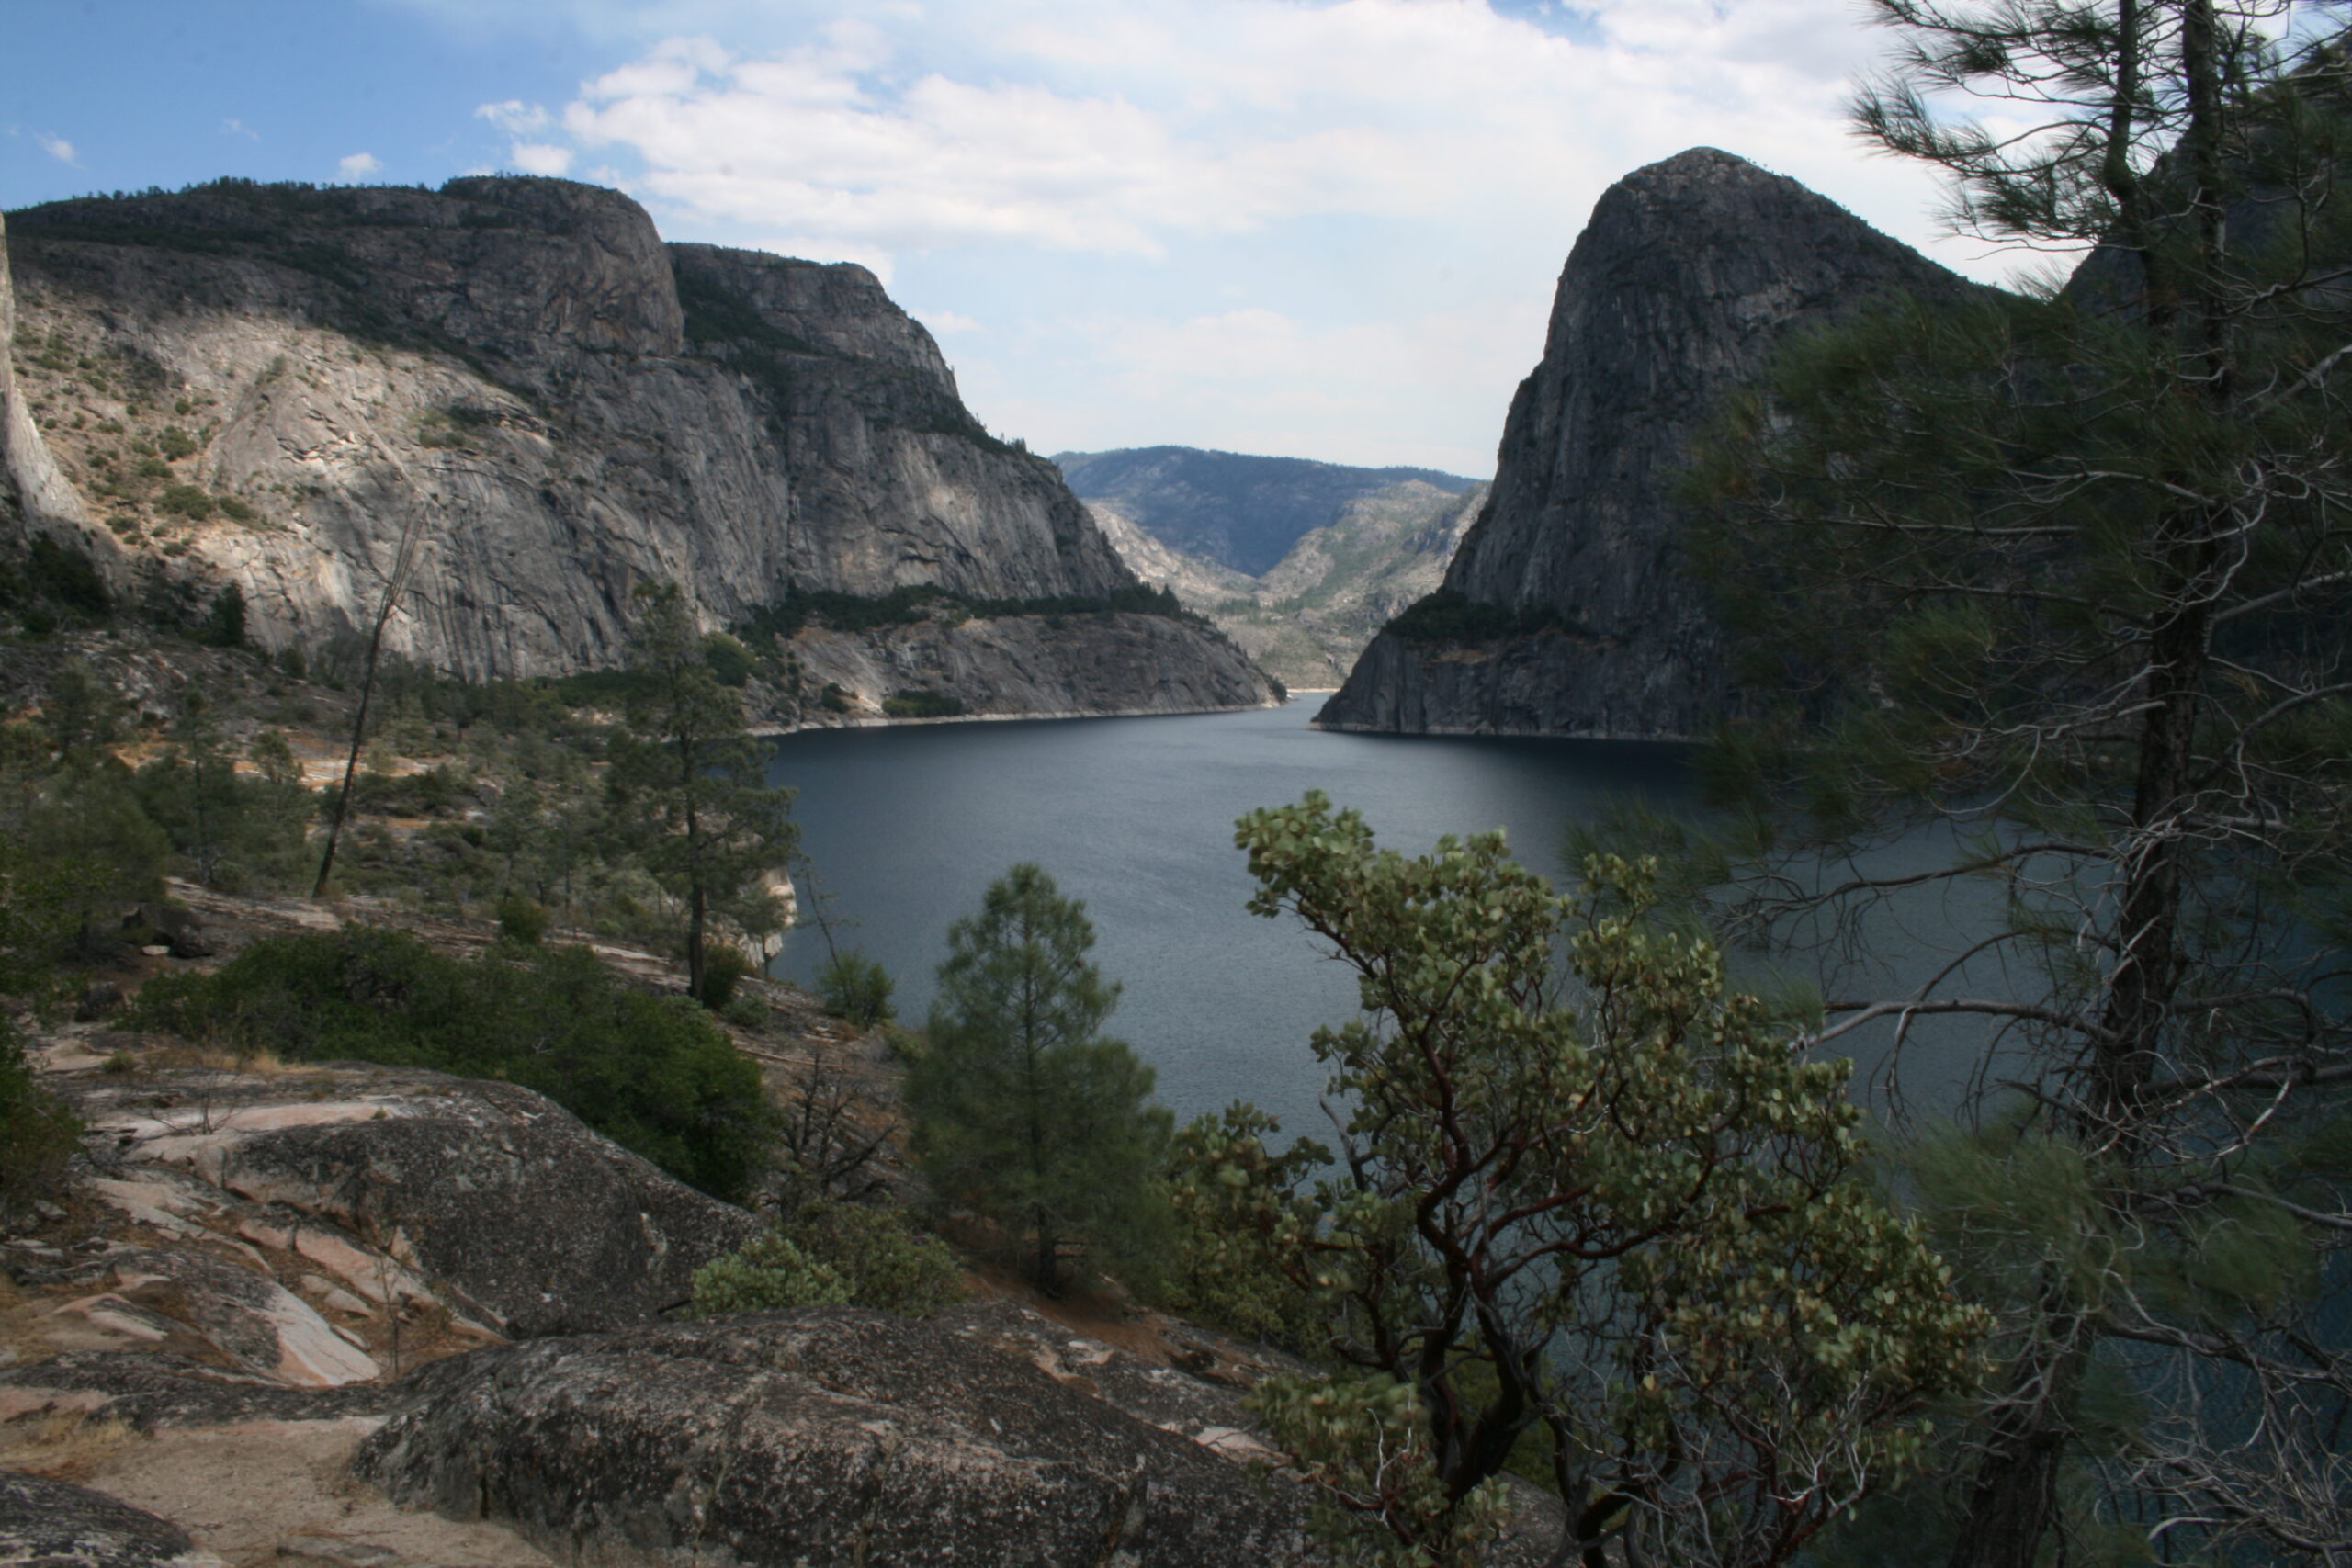 Hetch Hetchy reservoir view with trees, mountains